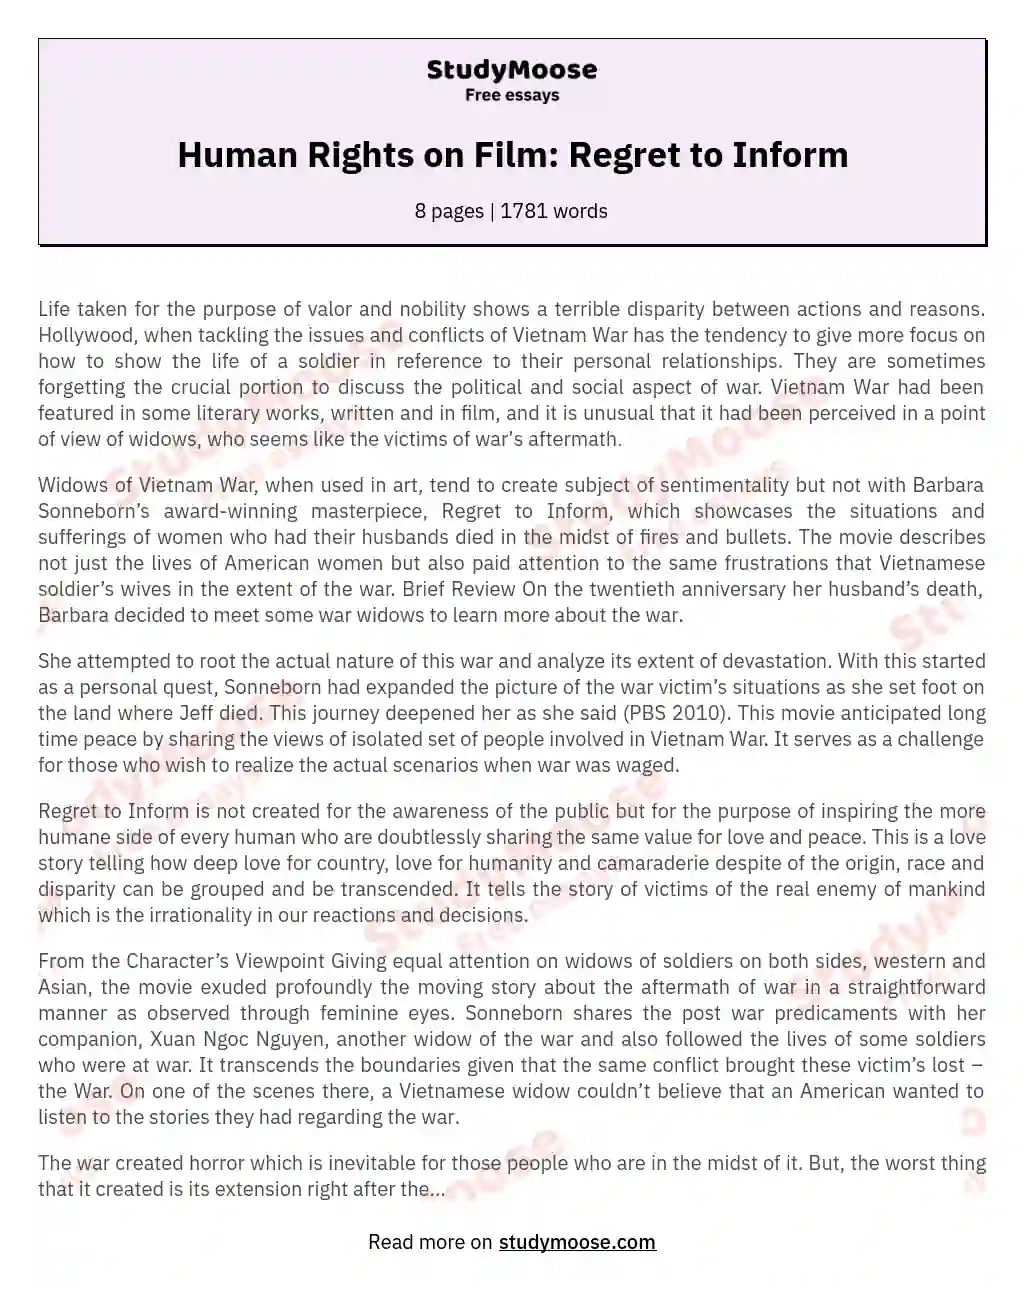 Human Rights on Film: Regret to Inform